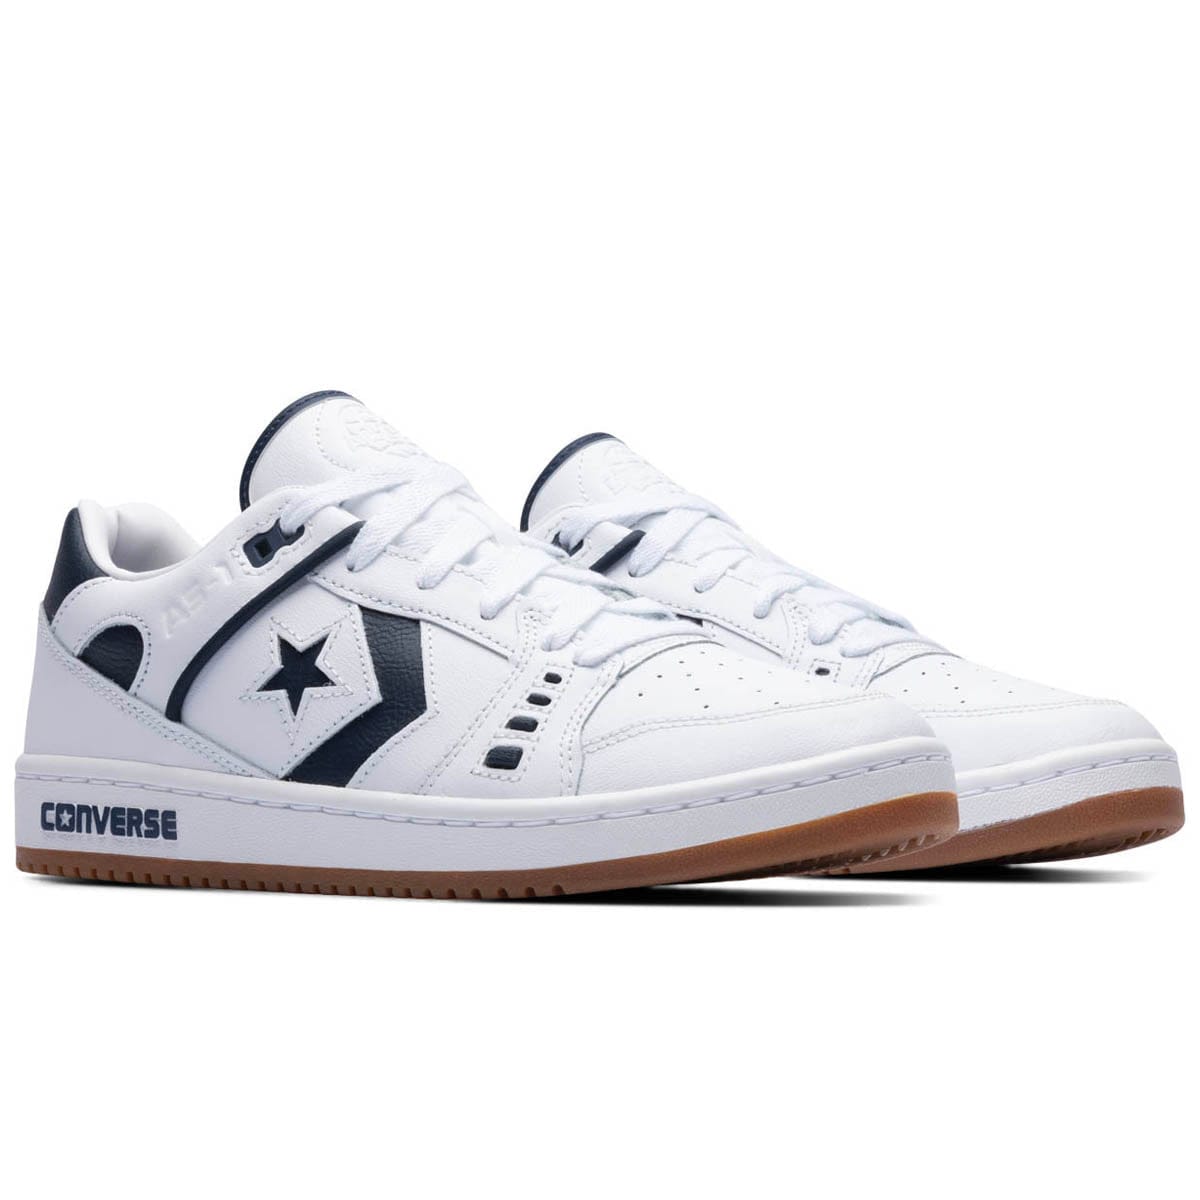 Converse Sneakers AS-1 PRO OX